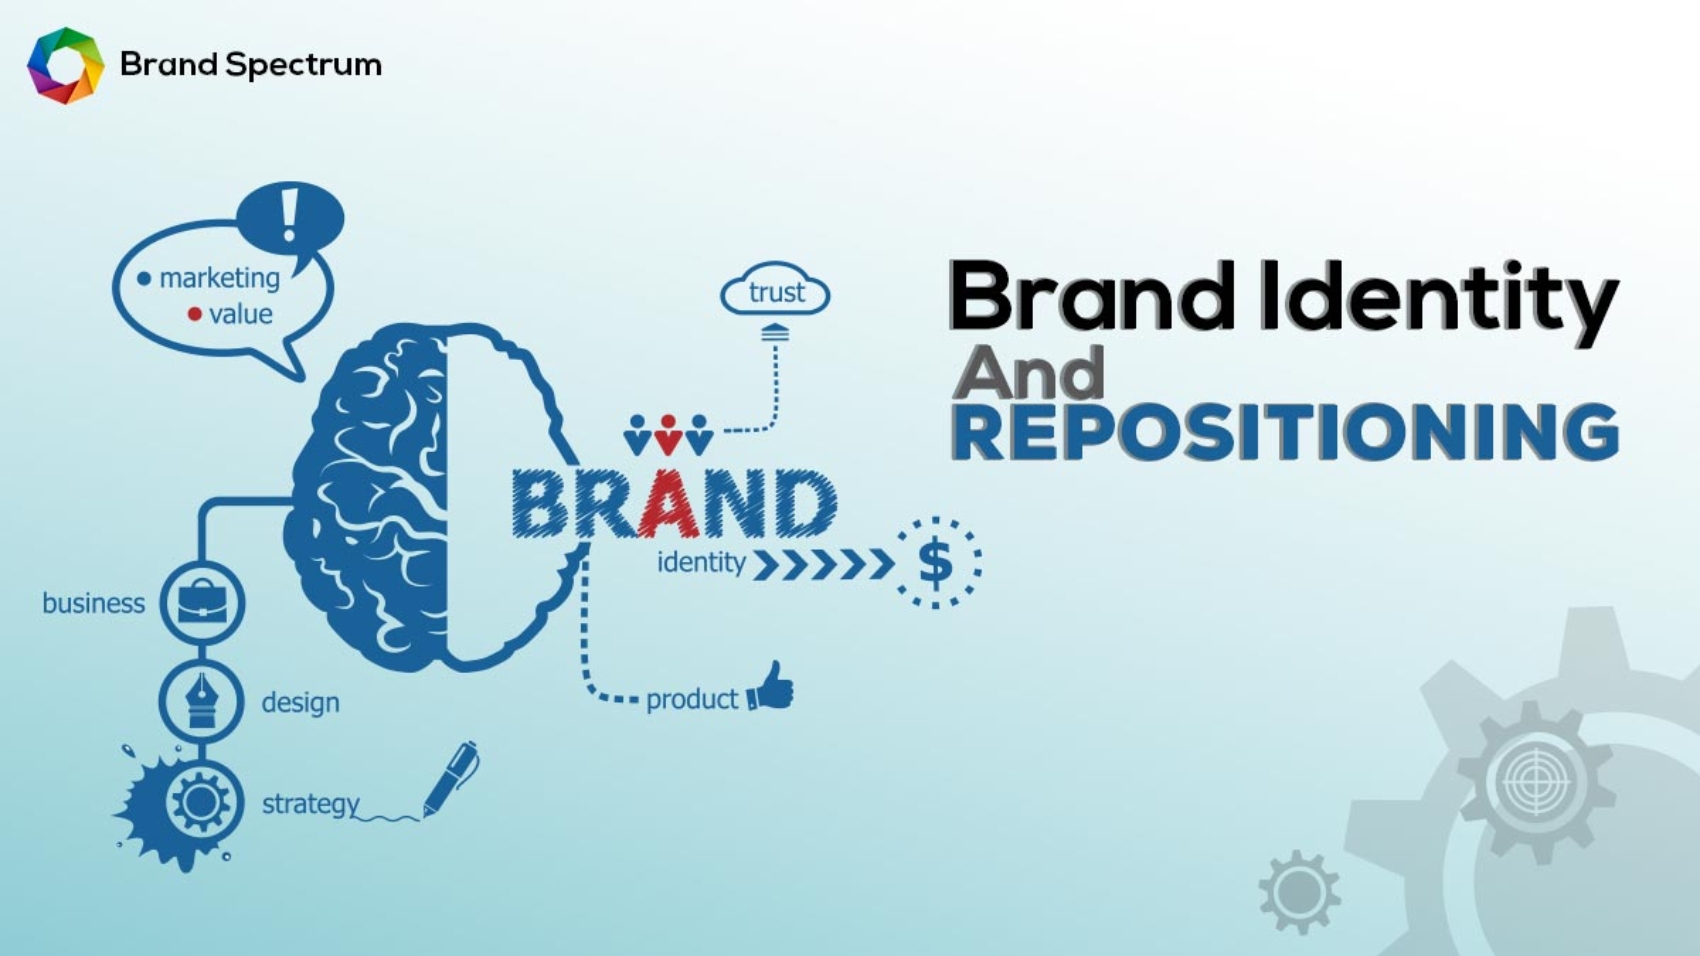 Brand Identity and Repositioning services